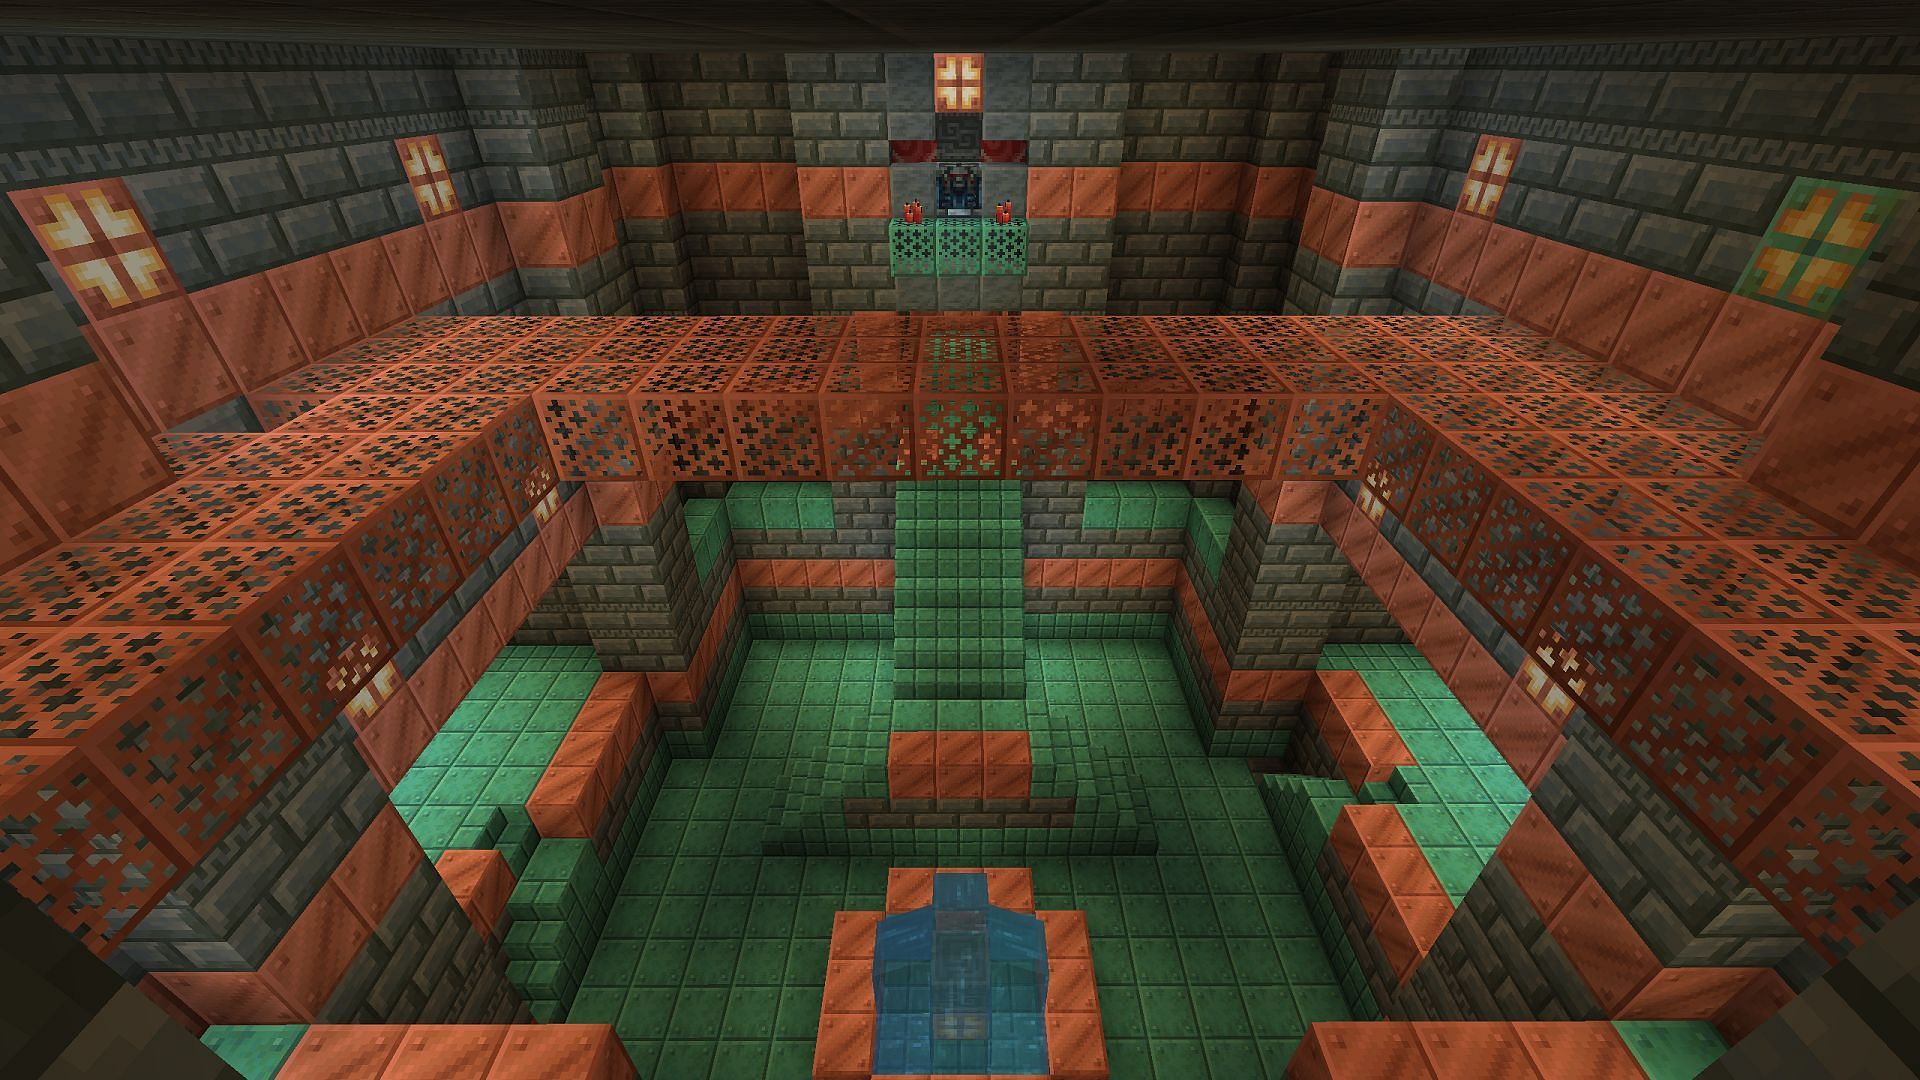 Are trial chambers worth exploring in Minecraft? 